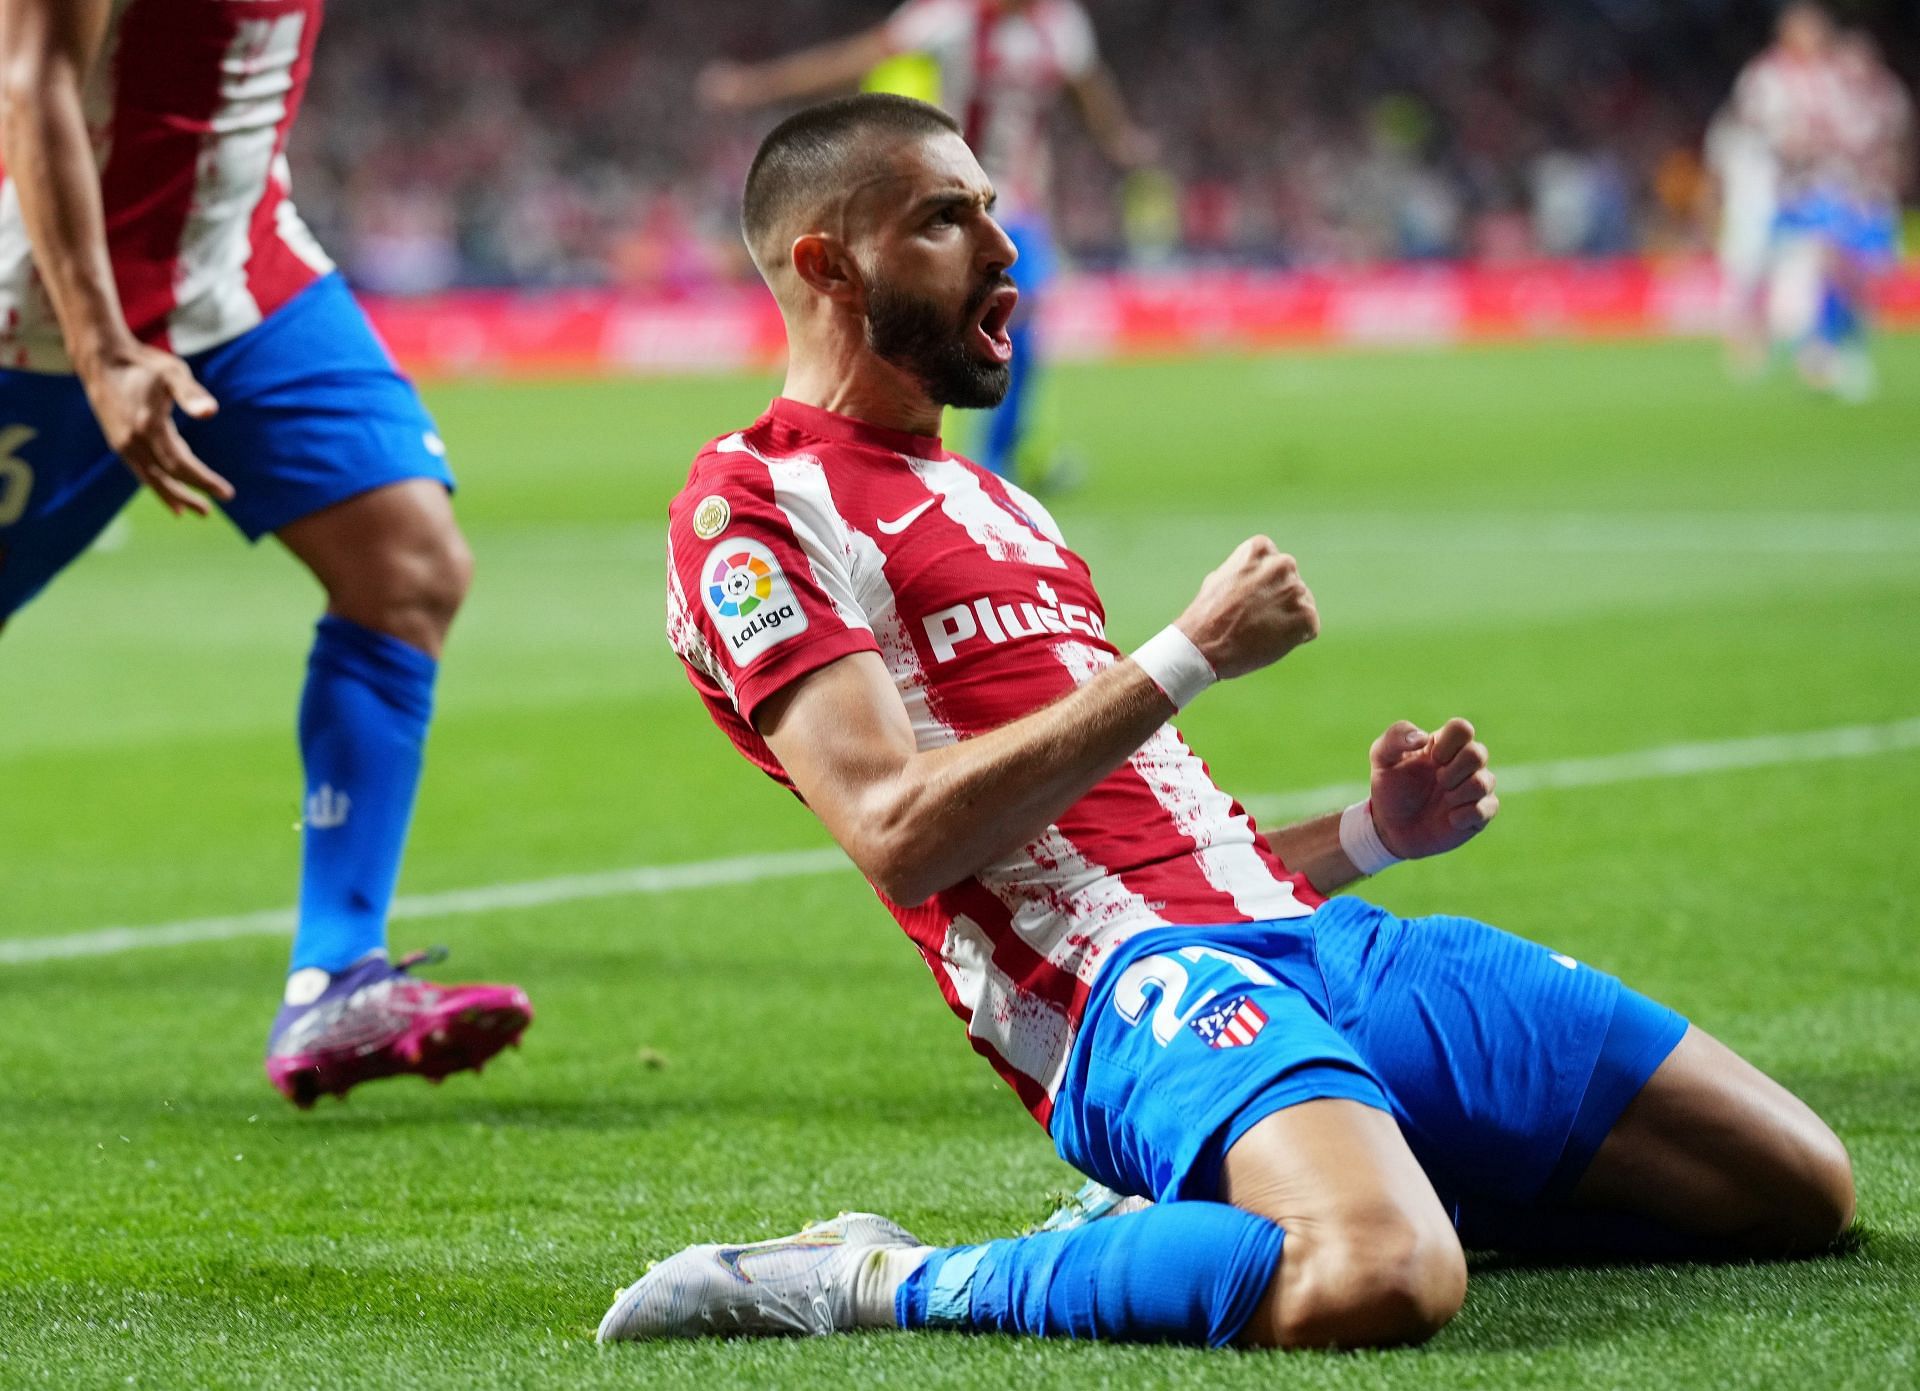 Carrasco is a reported Spurs target